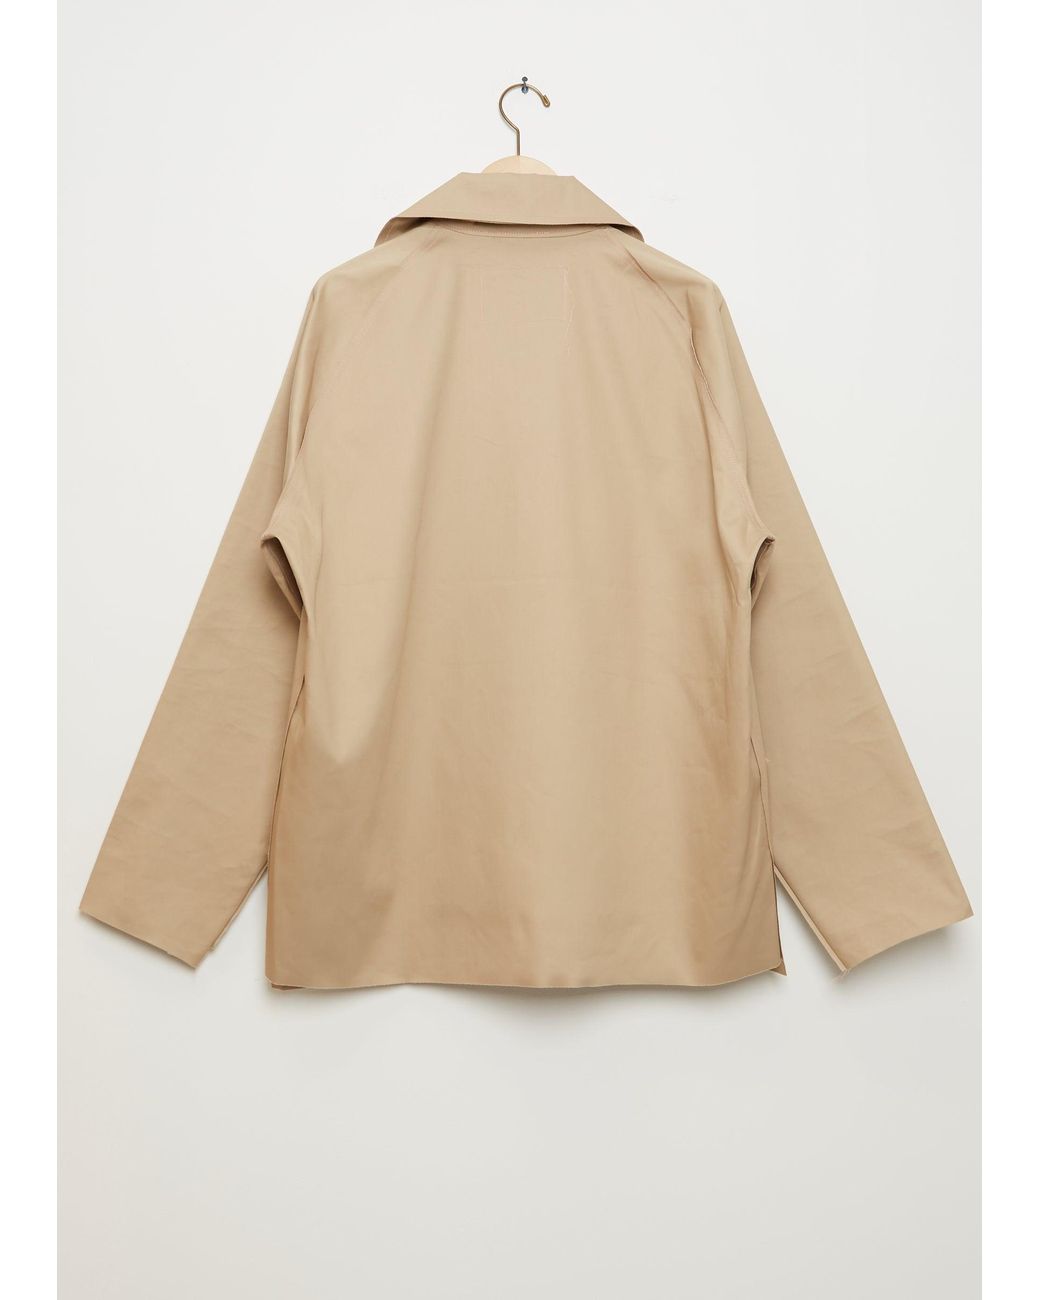 Camiel Fortgens Coach Jacket in Natural | Lyst